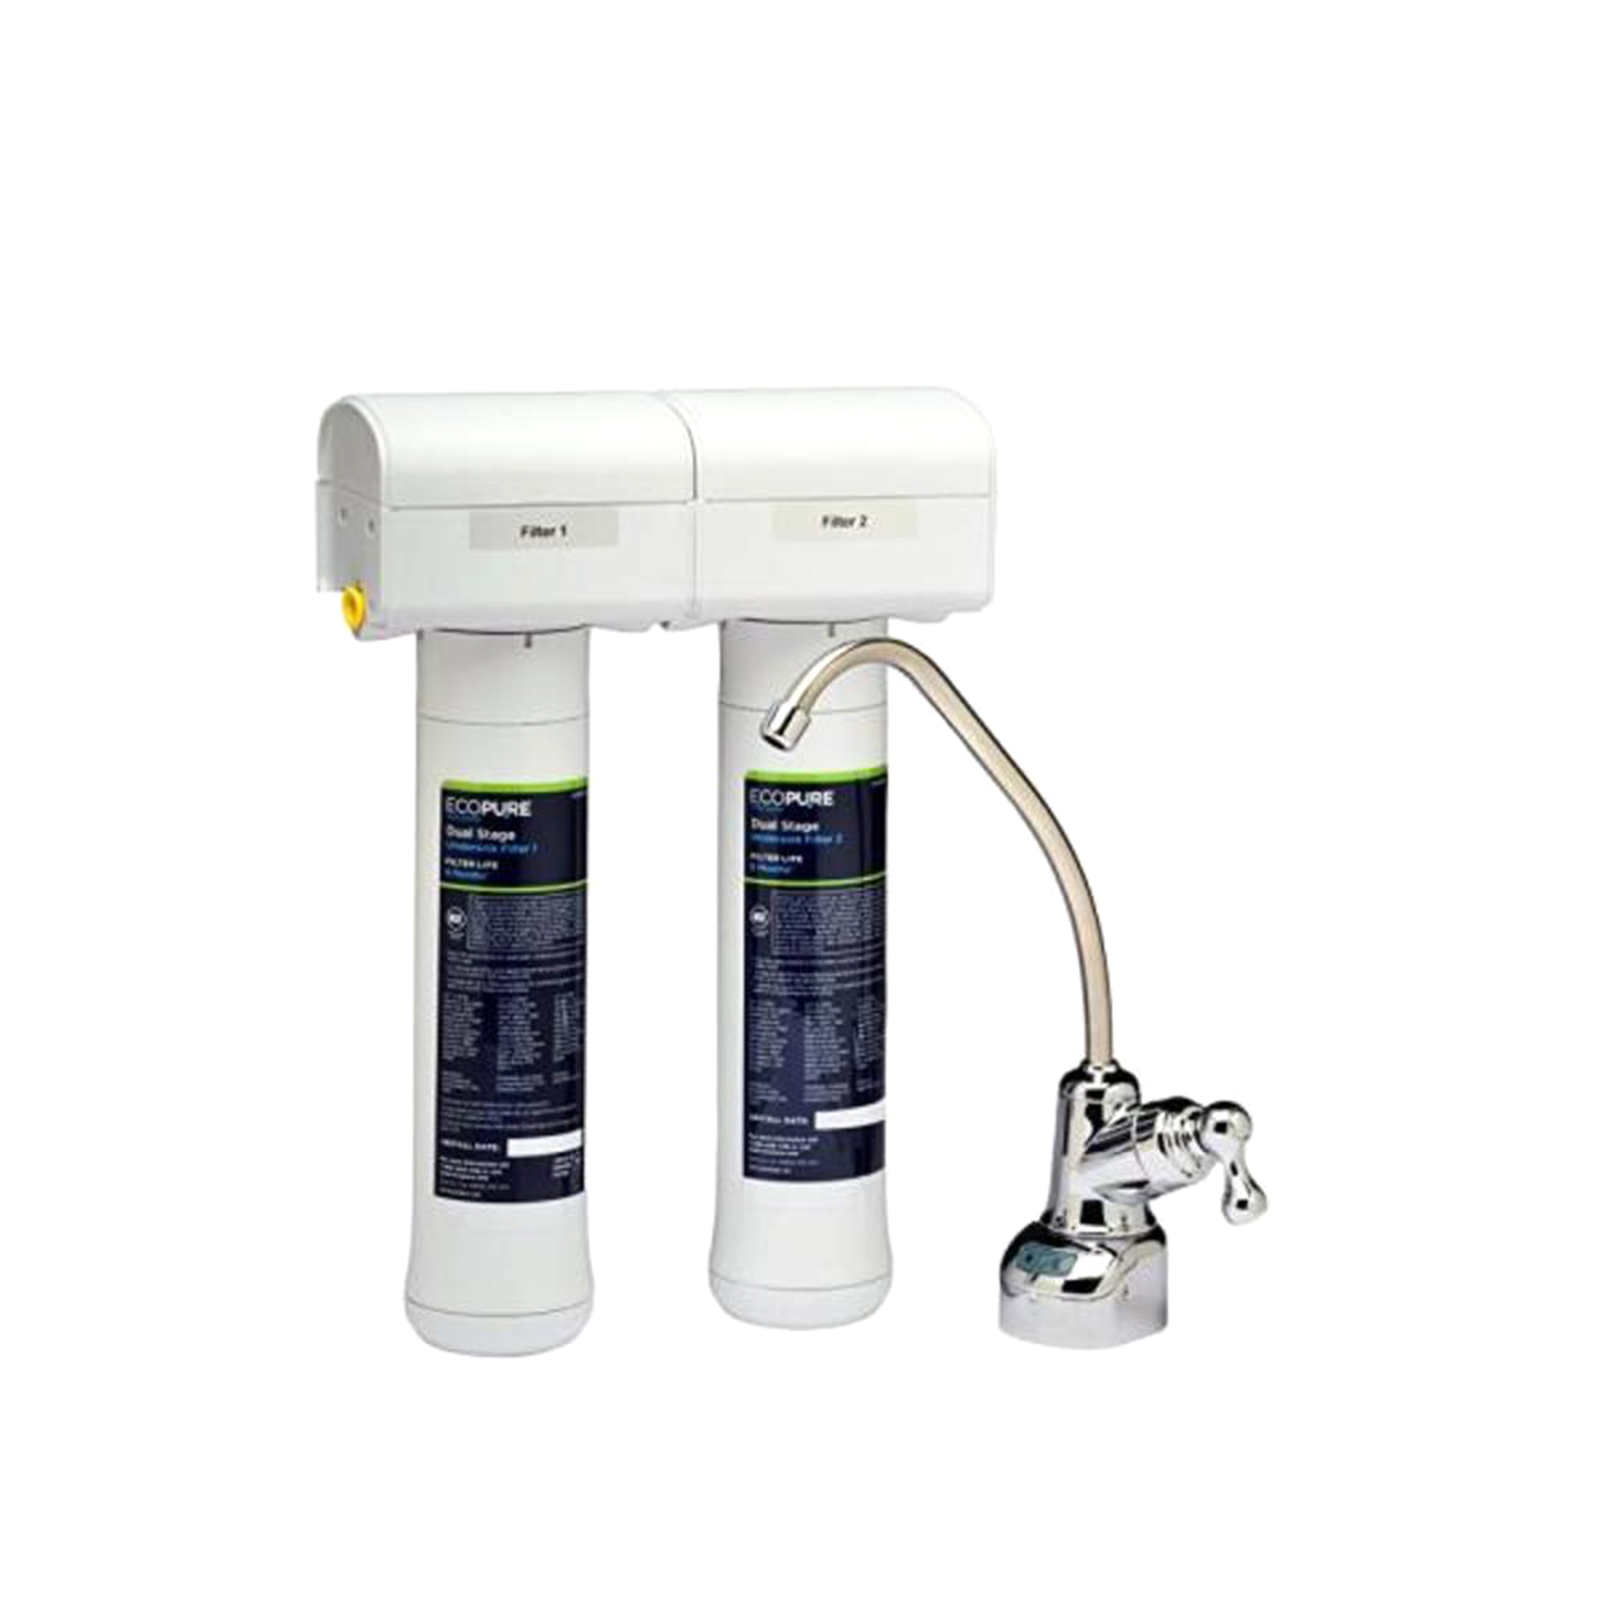 ecoPure ECOP200 Ecop20 Dual Stage Undersink Water Filtration System